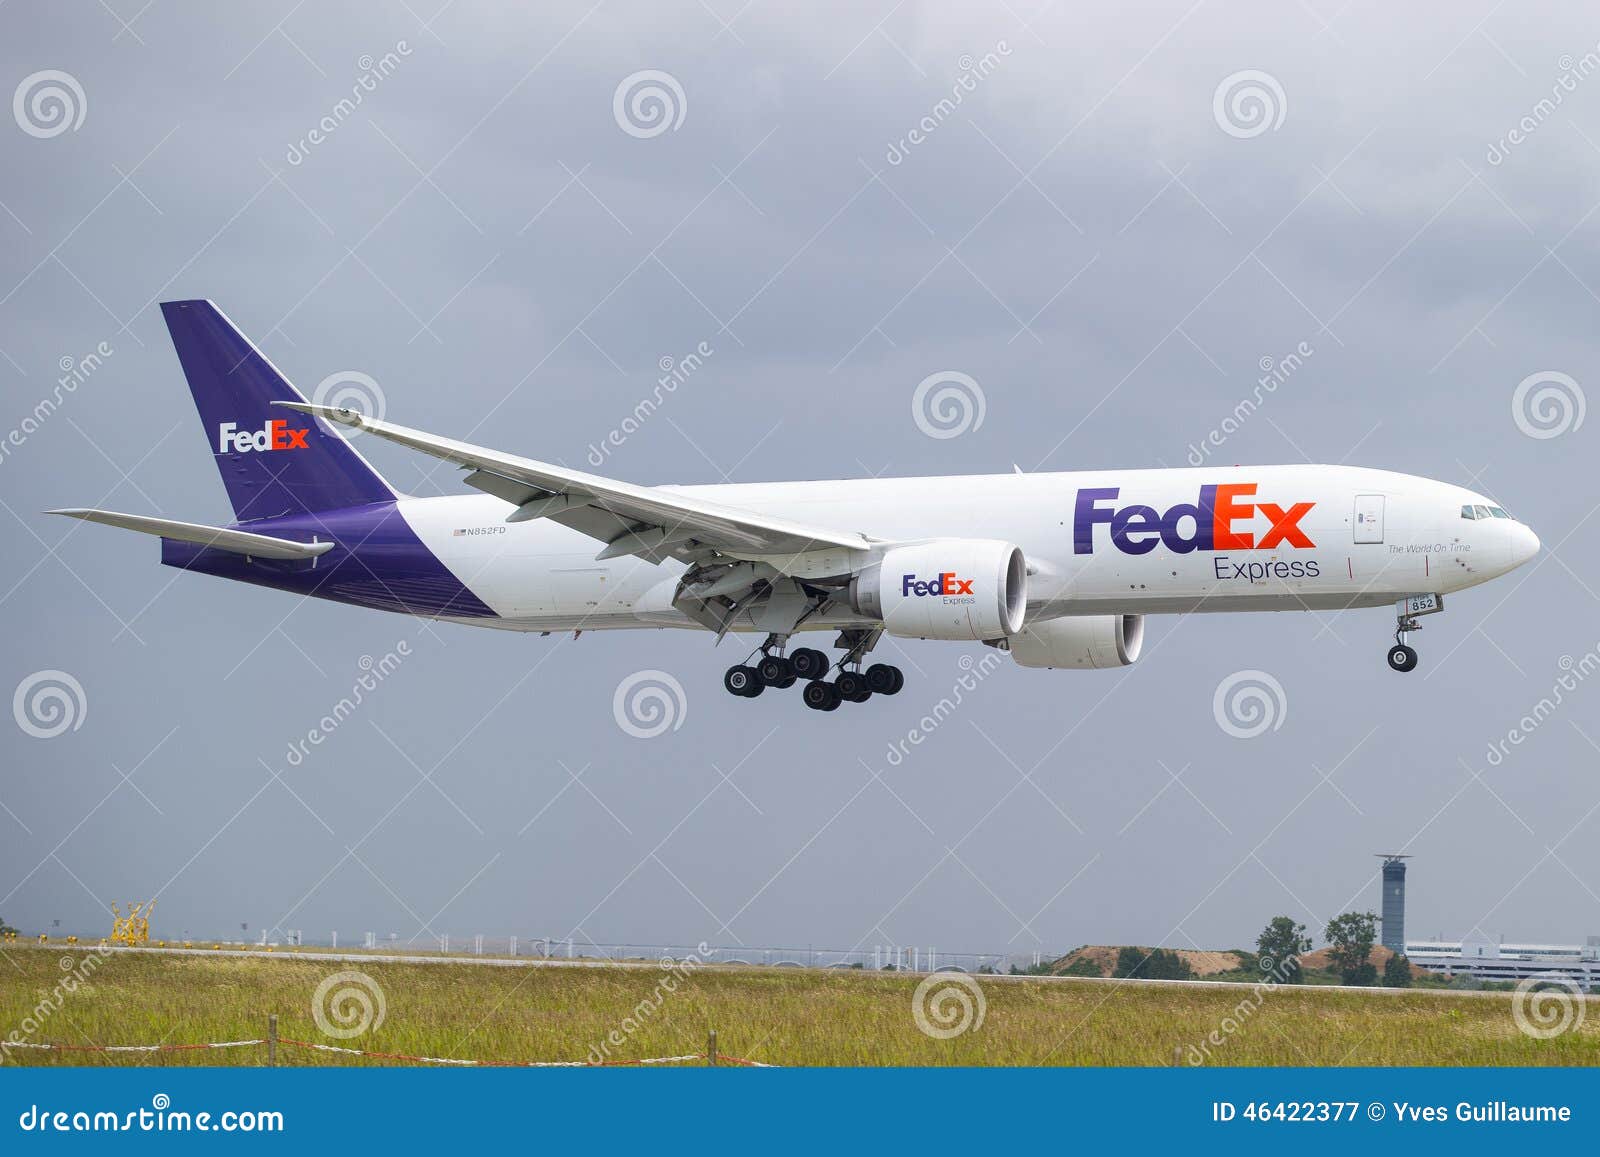 Boeing Md Fedex Burn Out Aircraft Wallpaperjpg Wallpaper  Background  Wallpapers